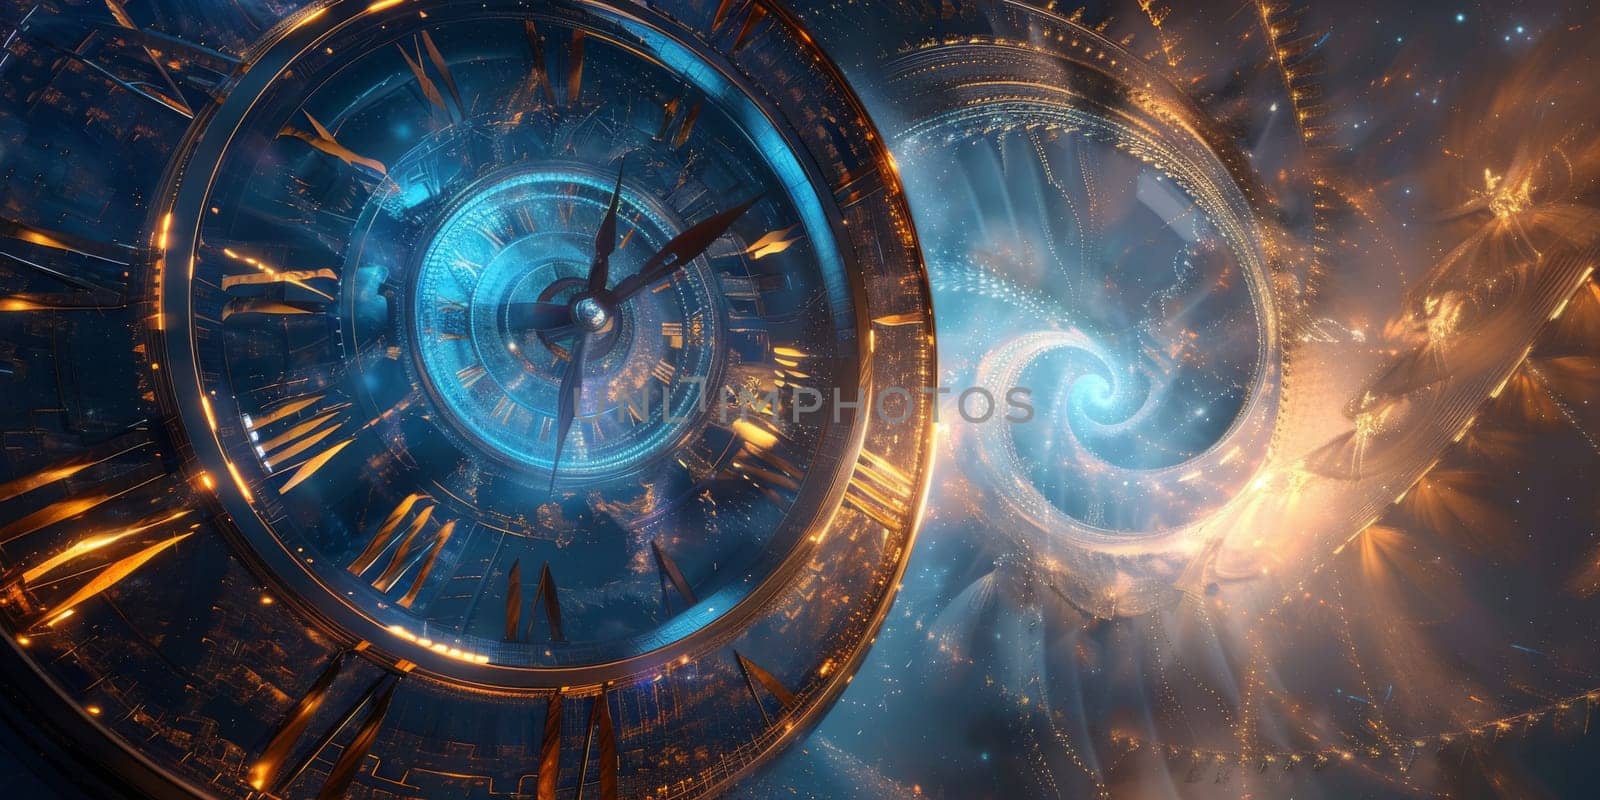 Futuristic time machine with a go back in time spiral technology